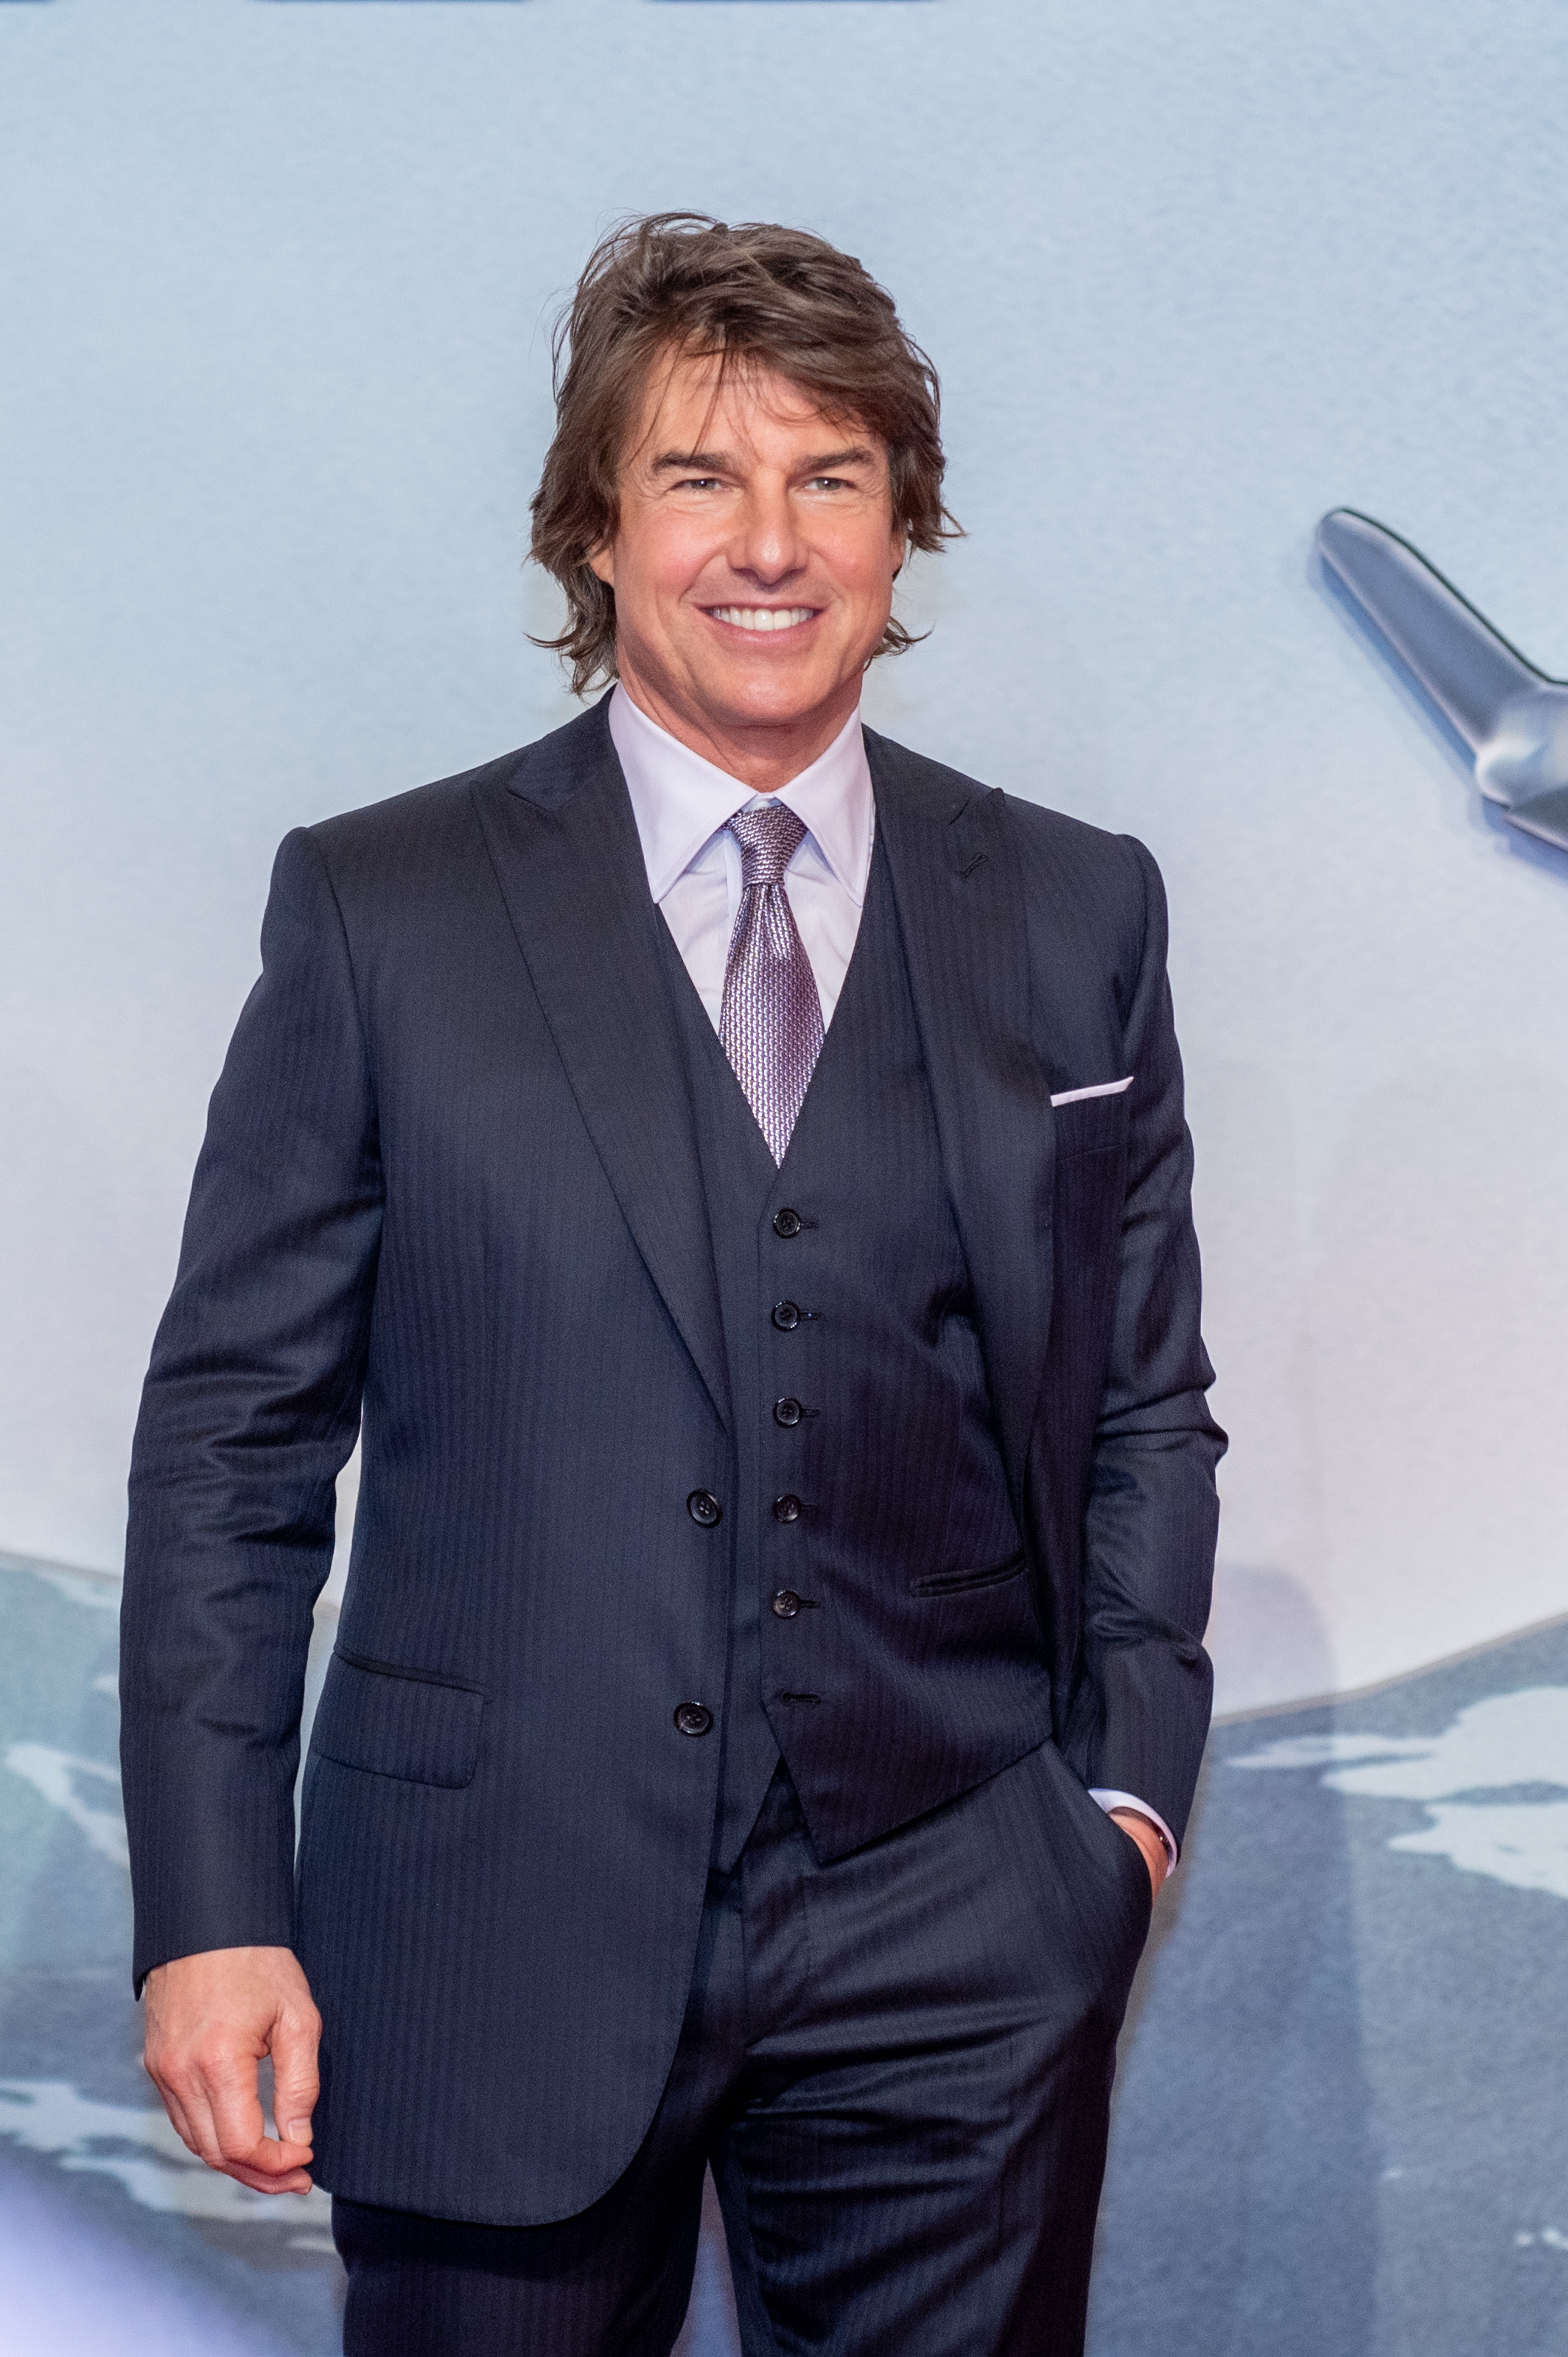 Tom Cruise on the red carpet in a suit and tie